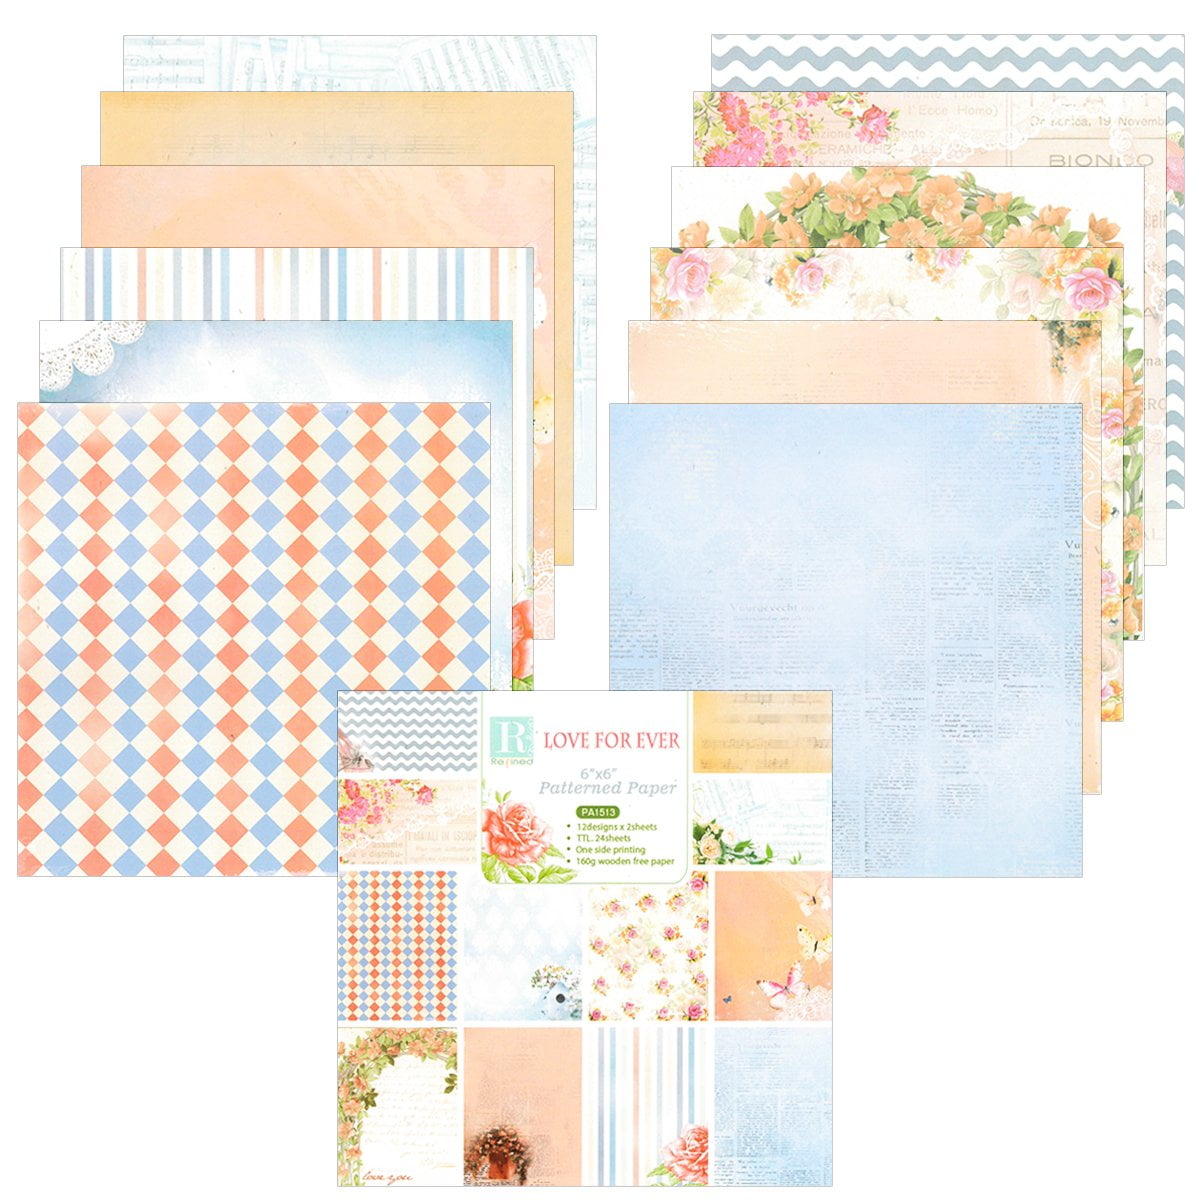 Craft Perfect Blue Blossom Patterned Paper Pack 6x6 Double Sided